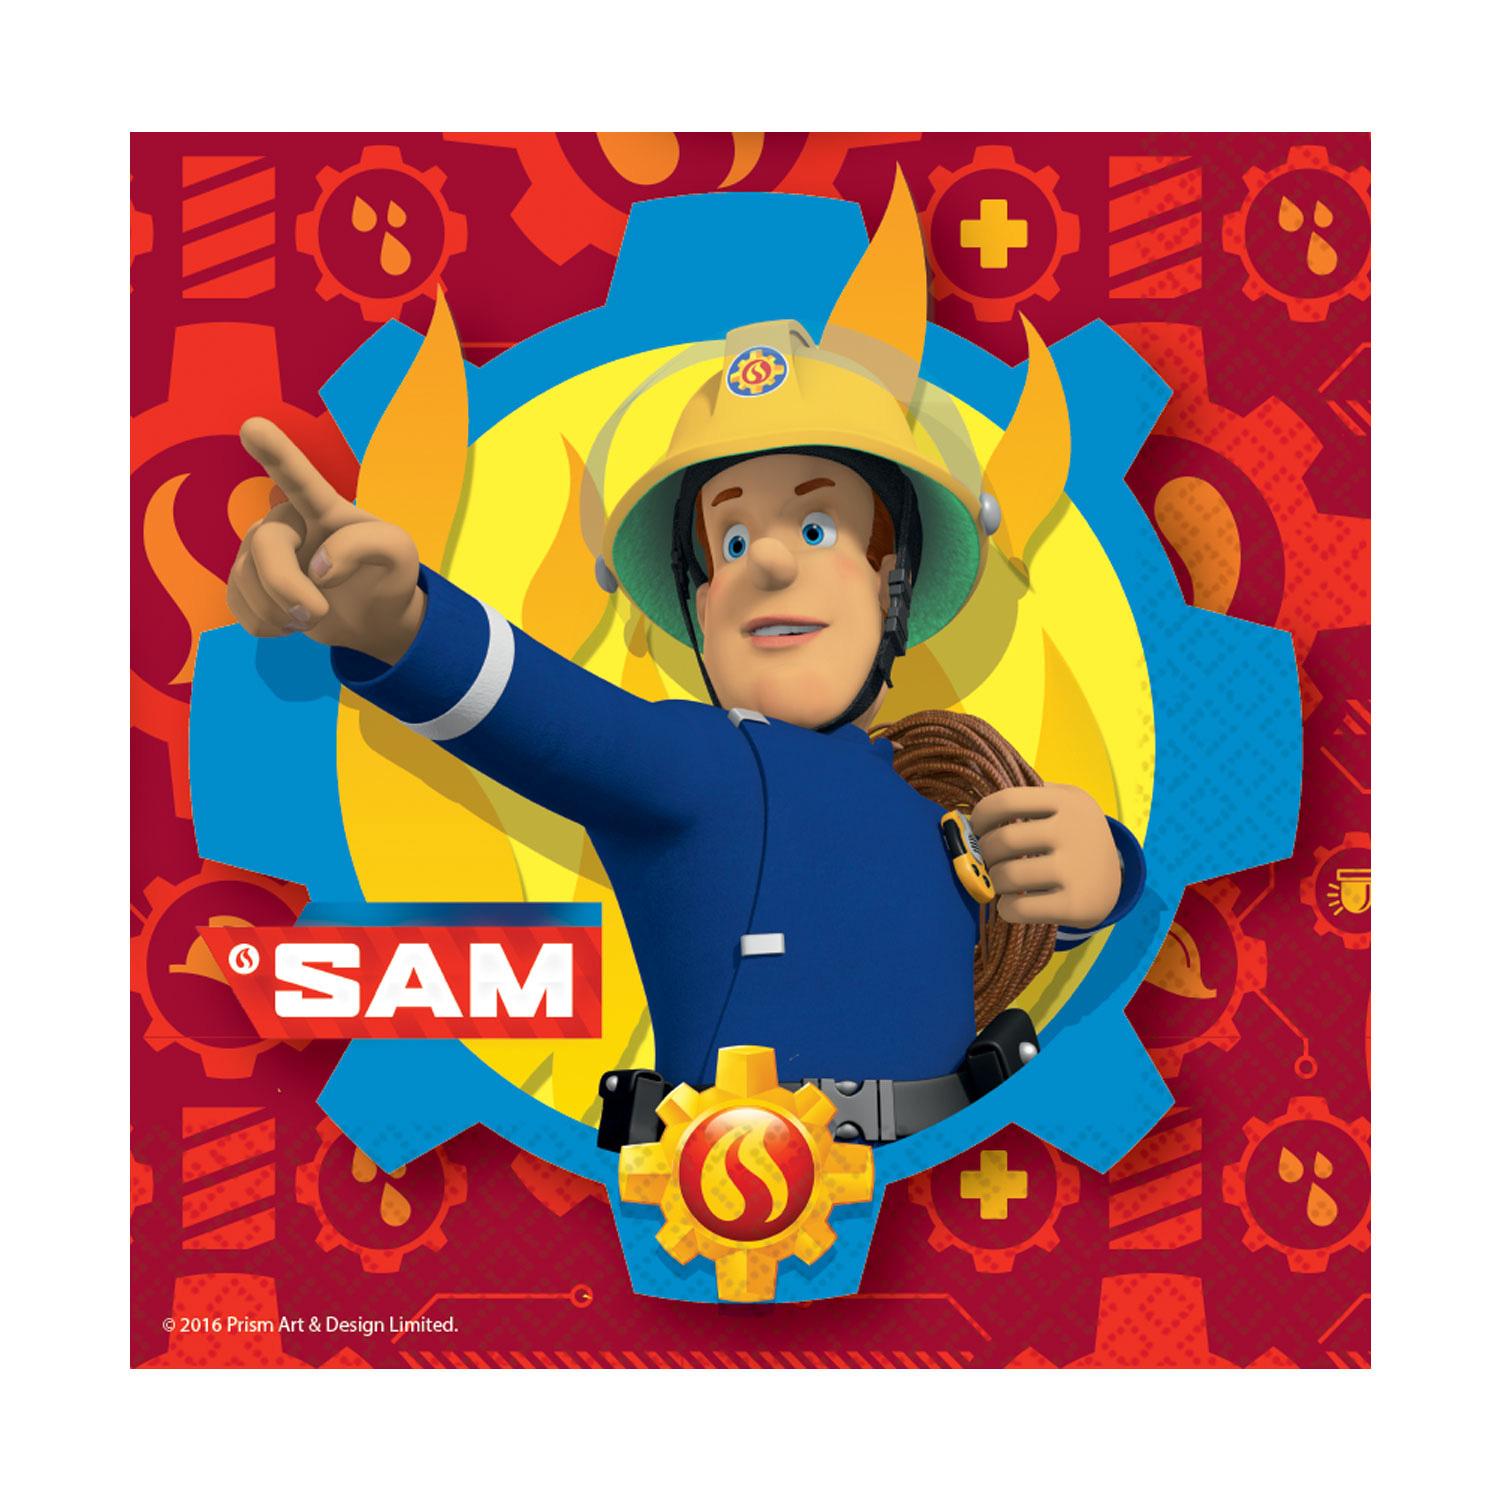 Fireman Sam Lunch Tissues 20pcs Printed Tableware - Party Centre